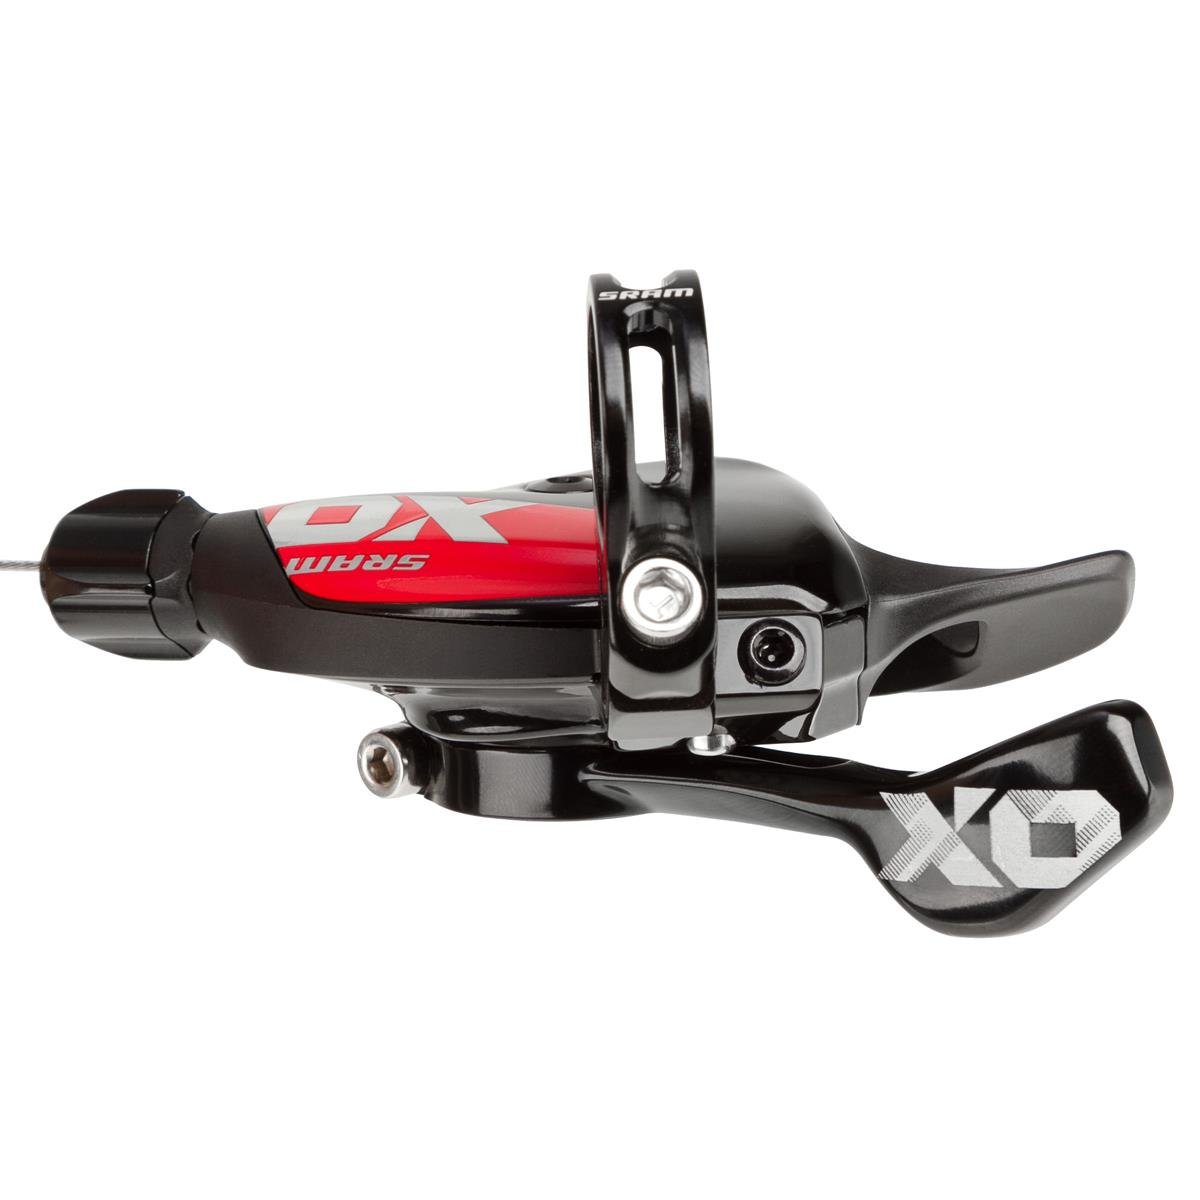 SRAM Shift Lever X01 DH 7-, 8-, 9-Speed, Rear, Black/Red